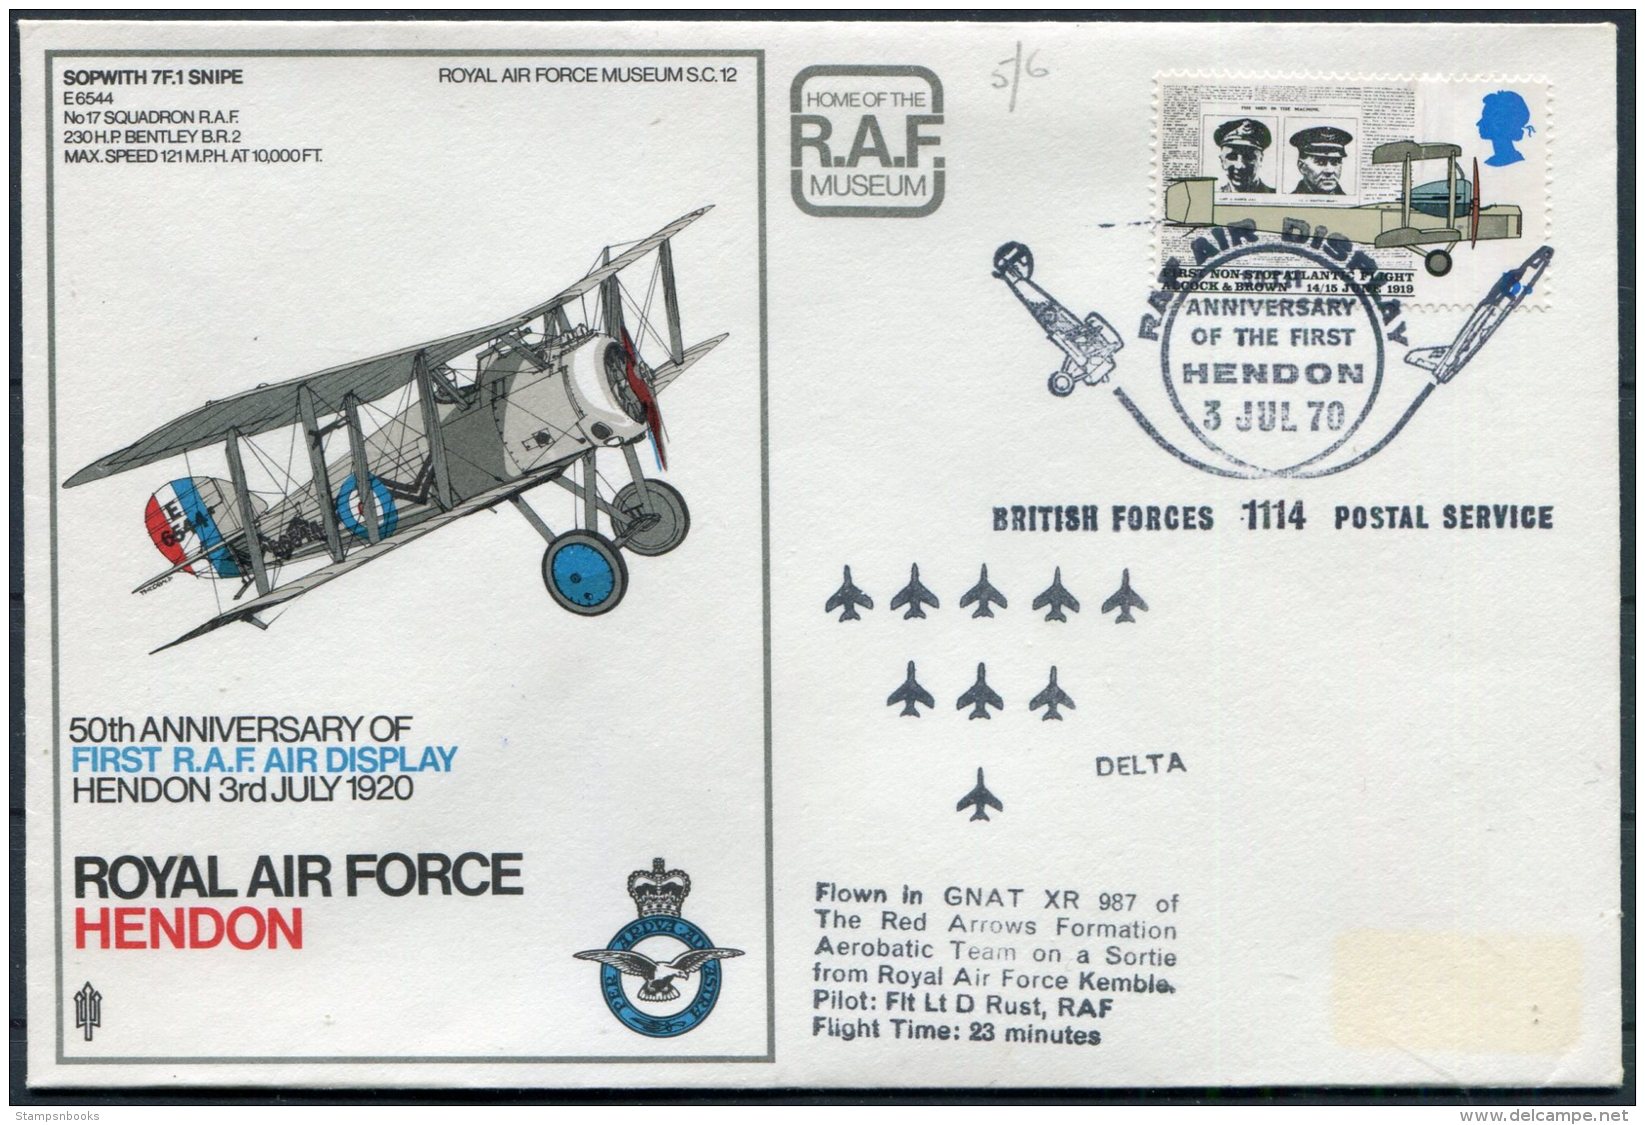 1970 GB Royal Air Force Museum Cover SC 12 / Sopworth Snipe BFPS RAF Hendon Red Arrows Delta - Covers & Documents